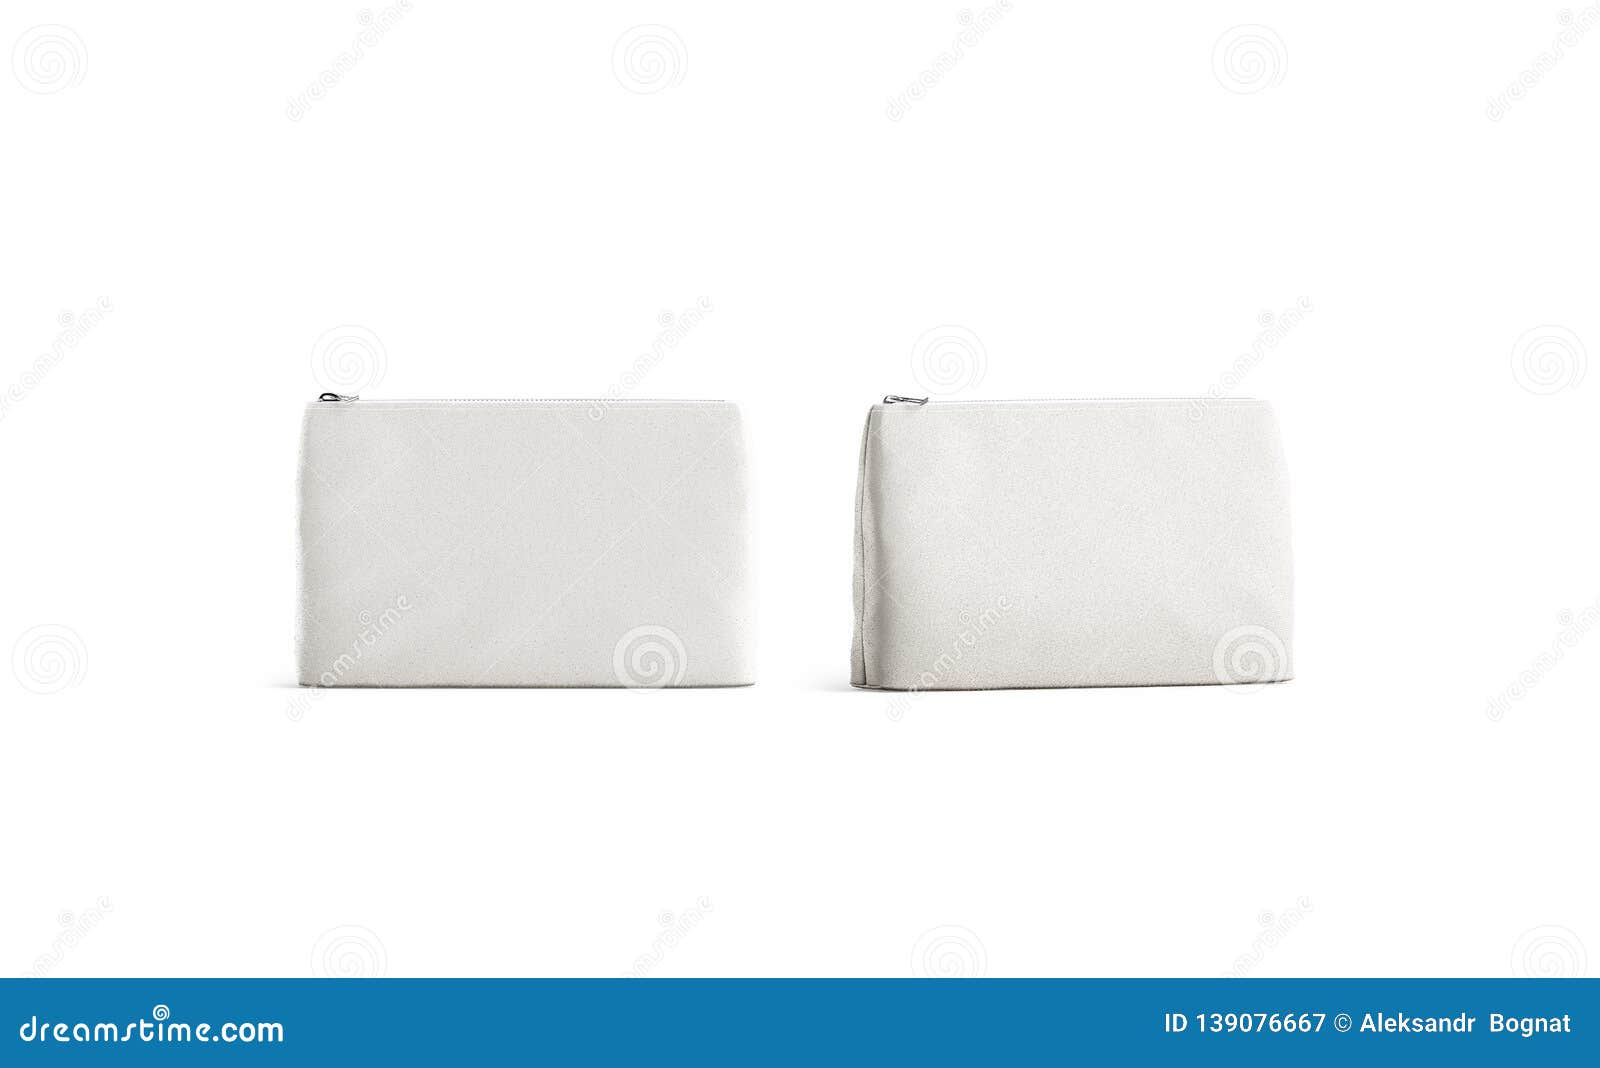 Download Blank Canvas Beauty Bag Mockup Isolated Front And Half View Stock Illustration Illustration Of Shopper Accessory 139076667 PSD Mockup Templates